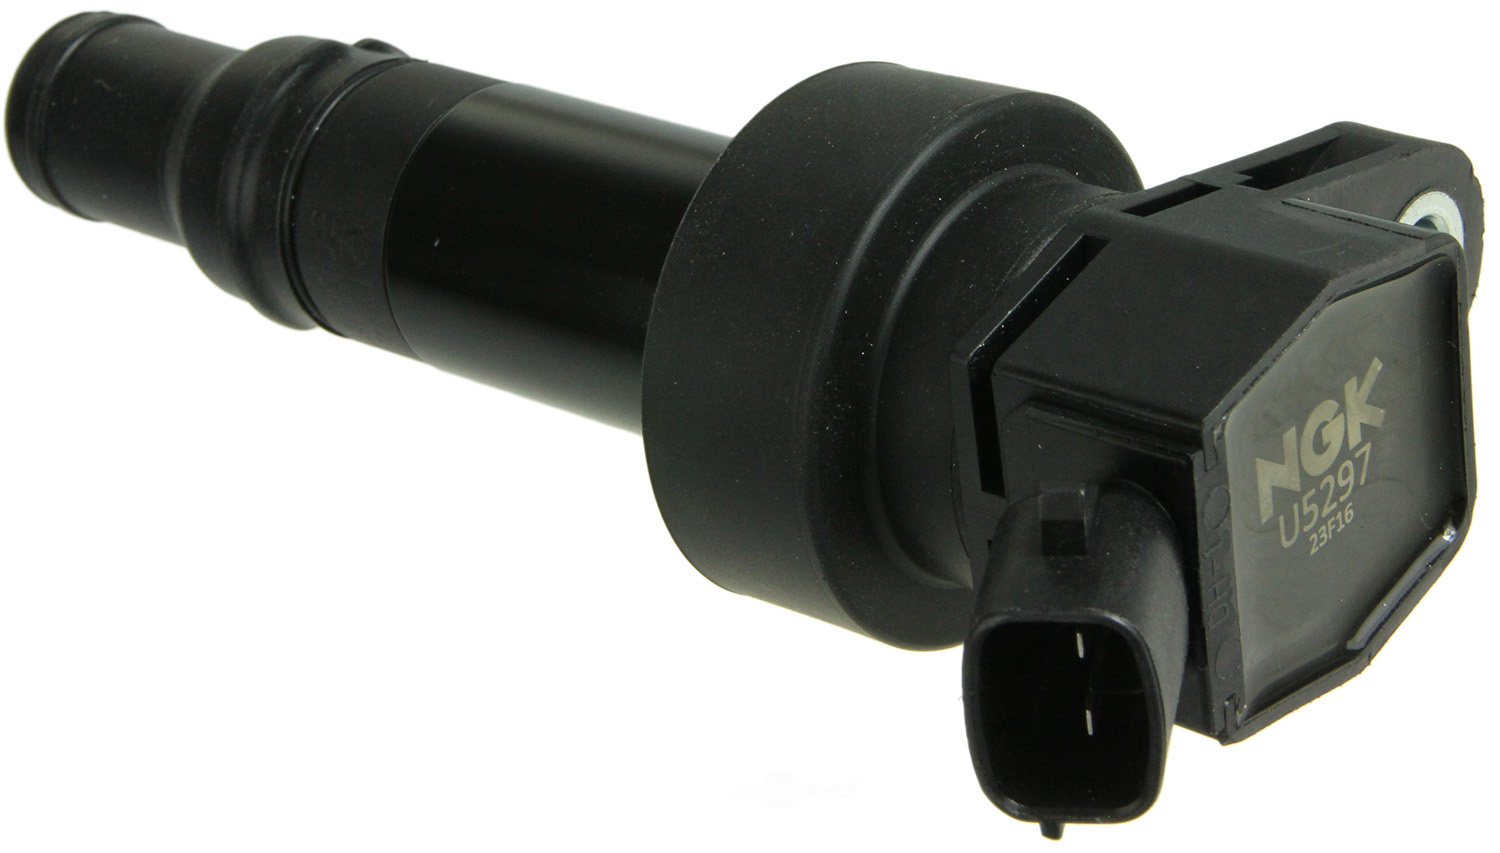 NGK USA STOCK NUMBERS - NGK COP(Pencil Type) Ignition Coil - NGK 48943